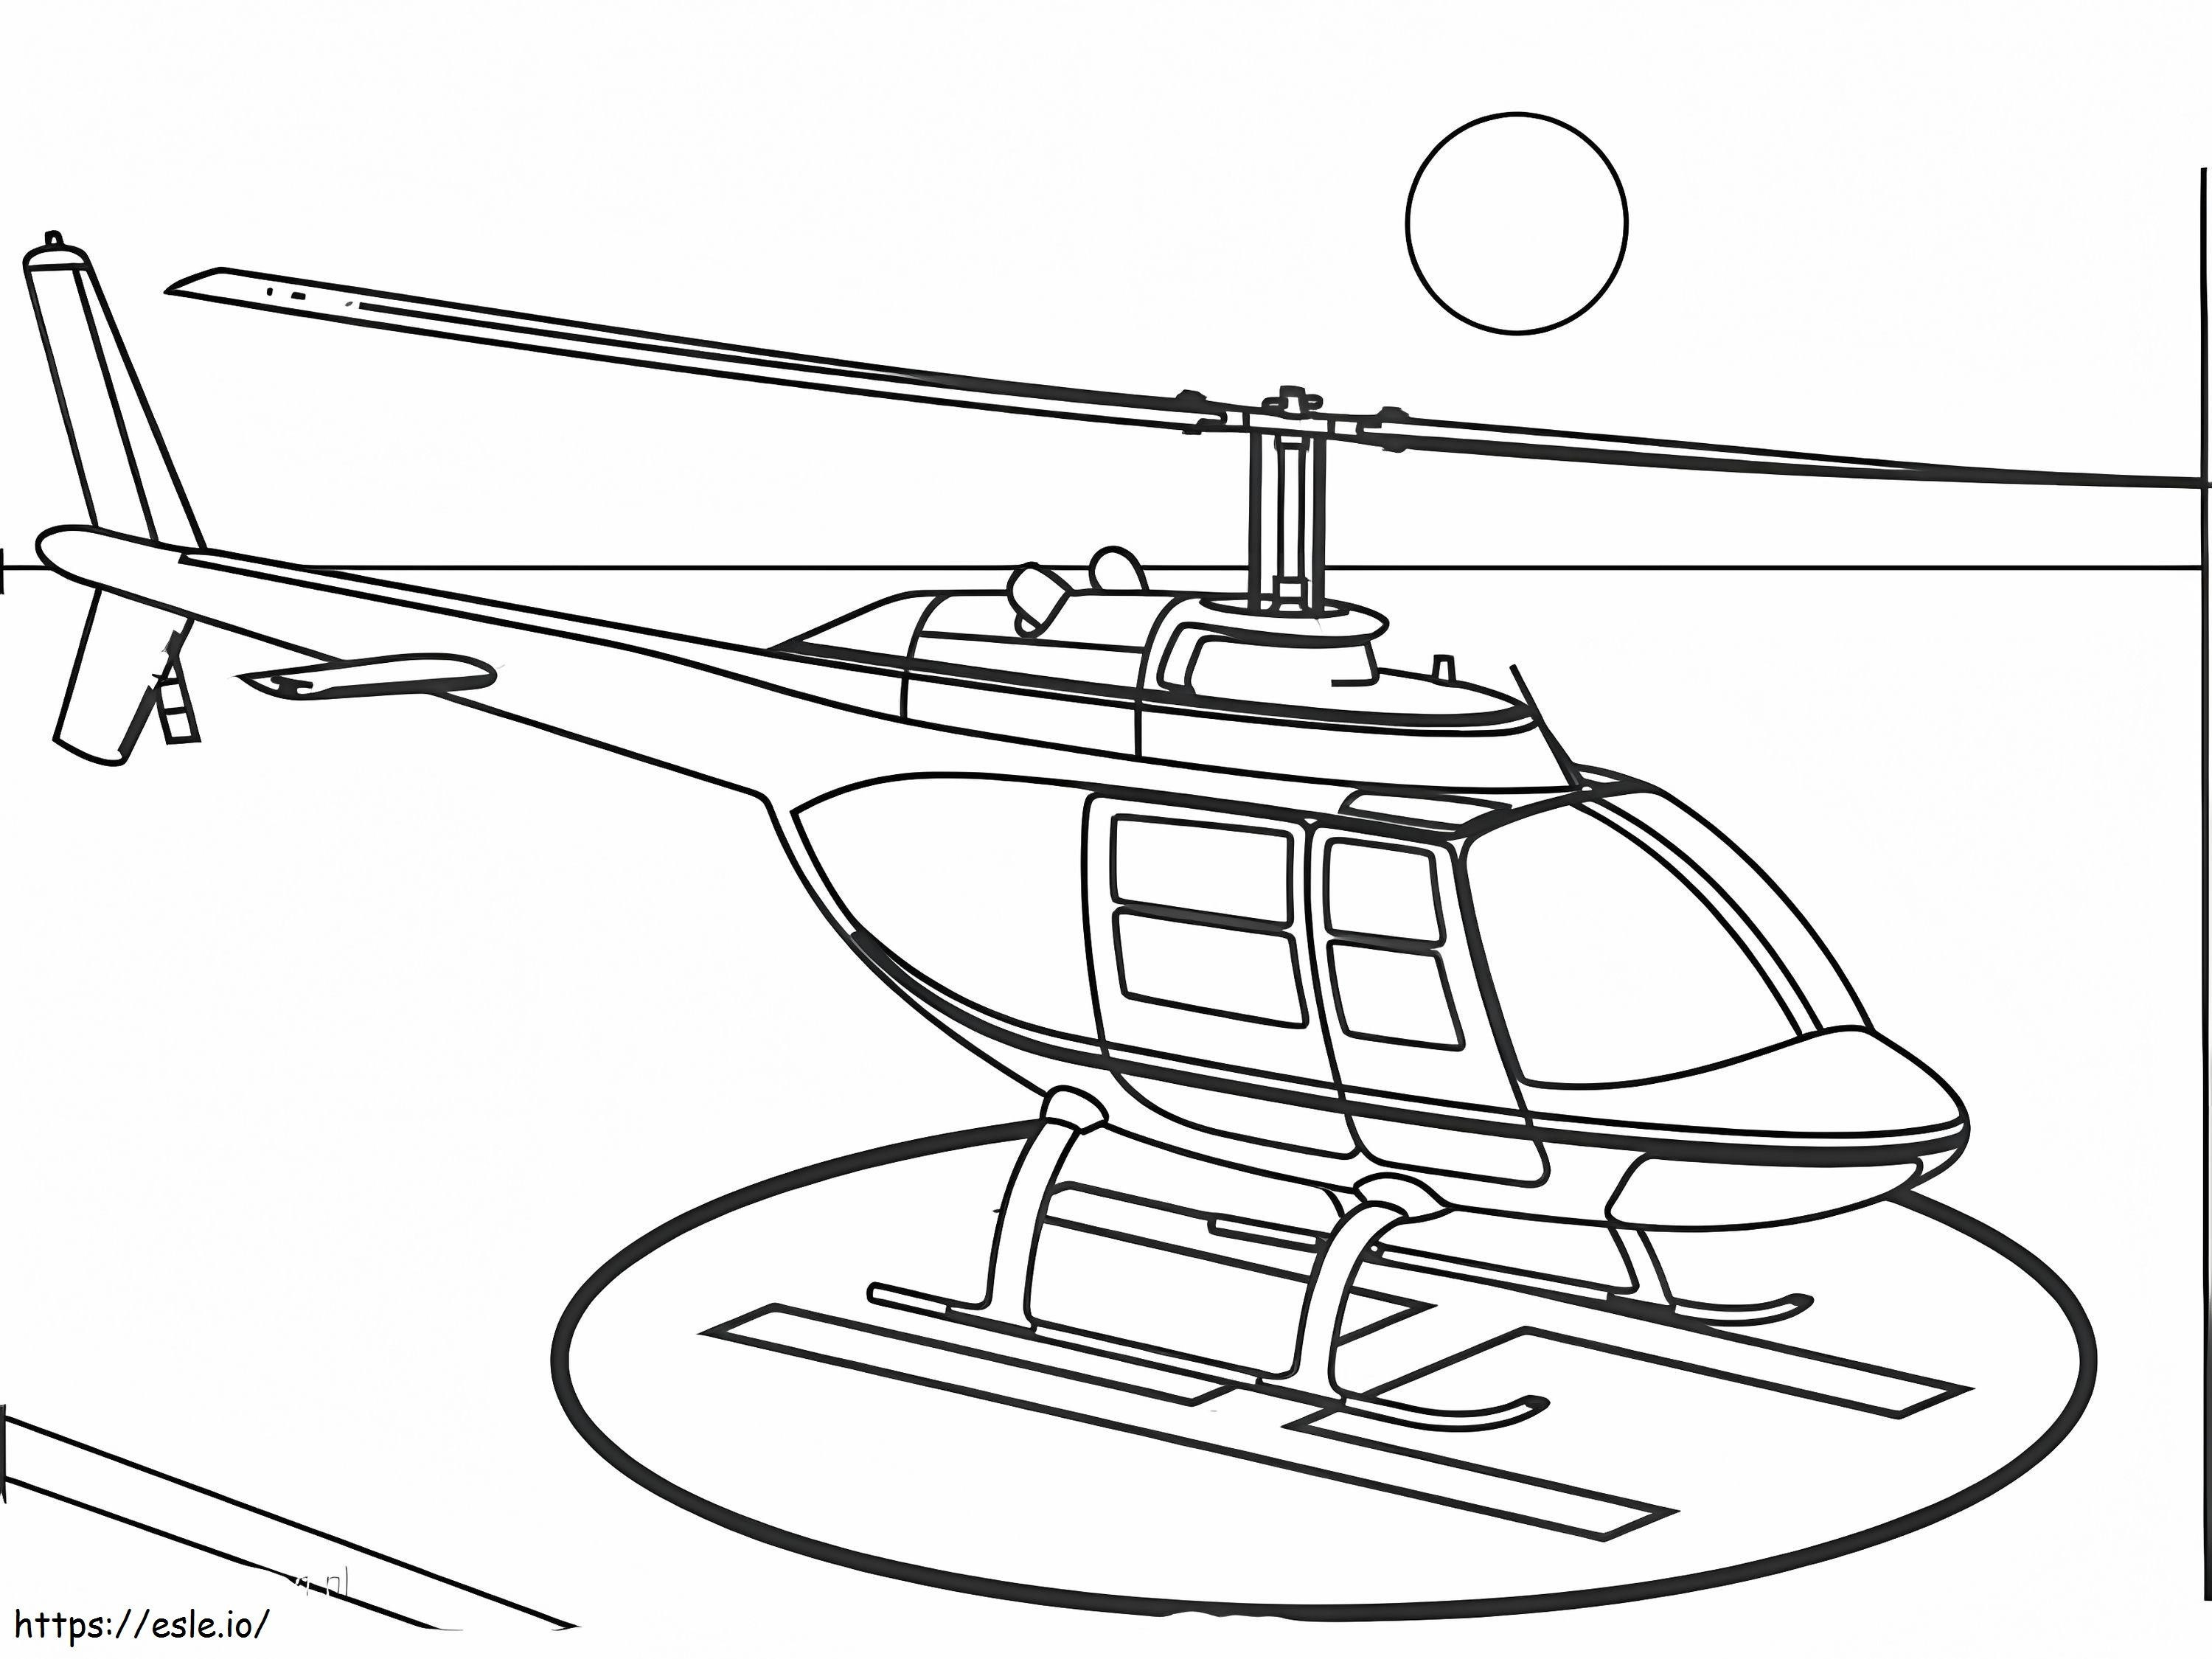 Helicopter 1 coloring page